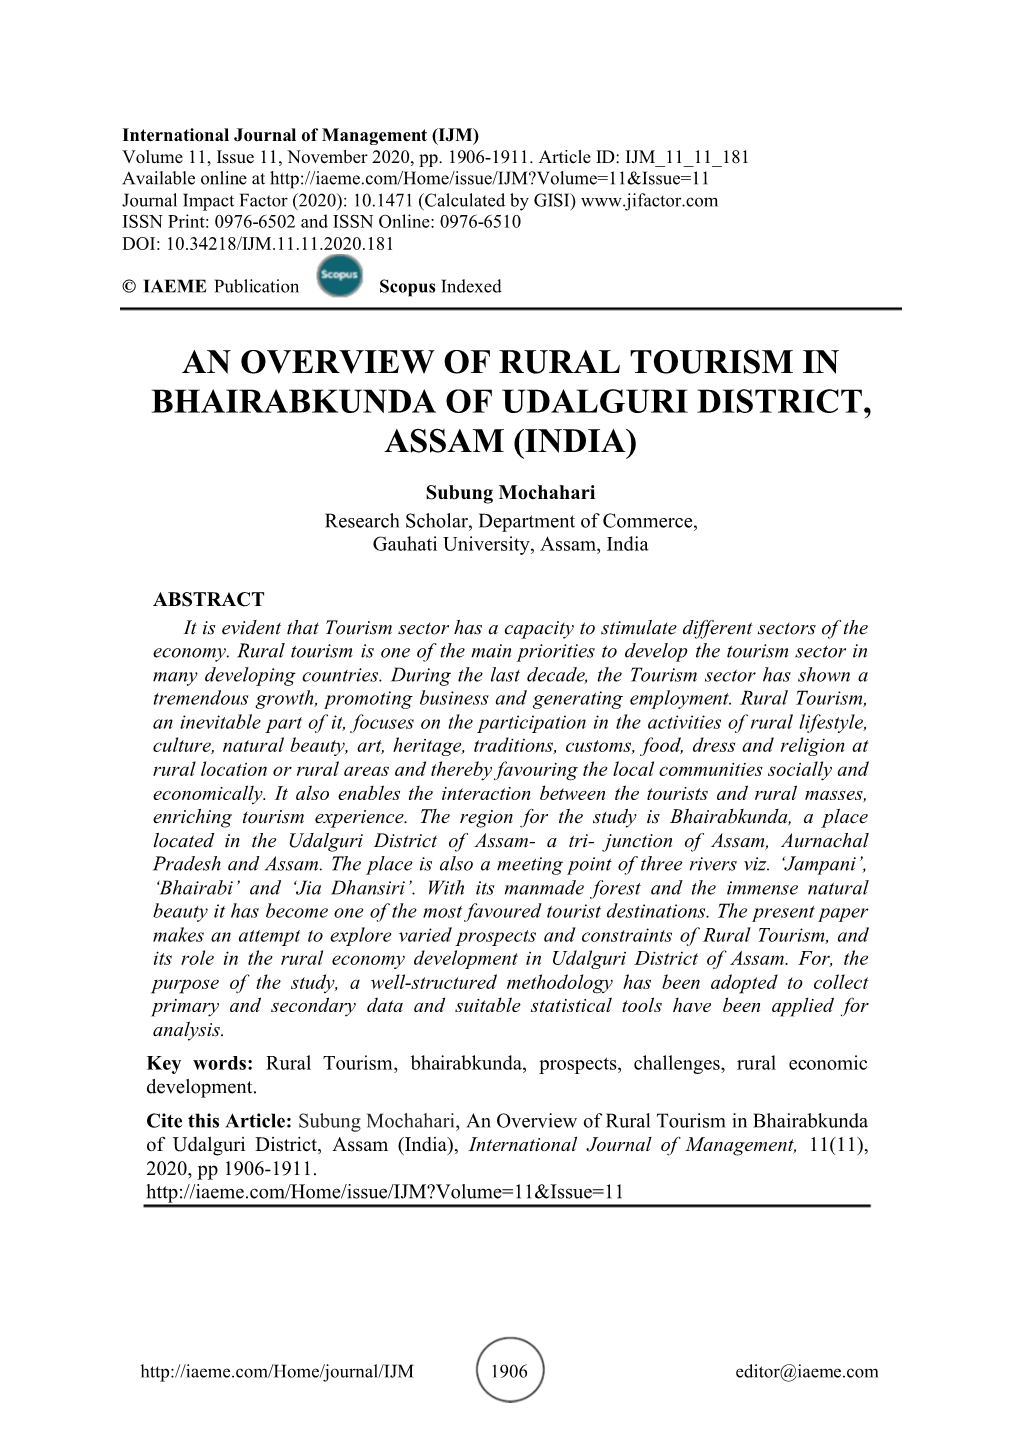 An Overview of Rural Tourism in Bhairabkunda of Udalguri District, Assam (India)